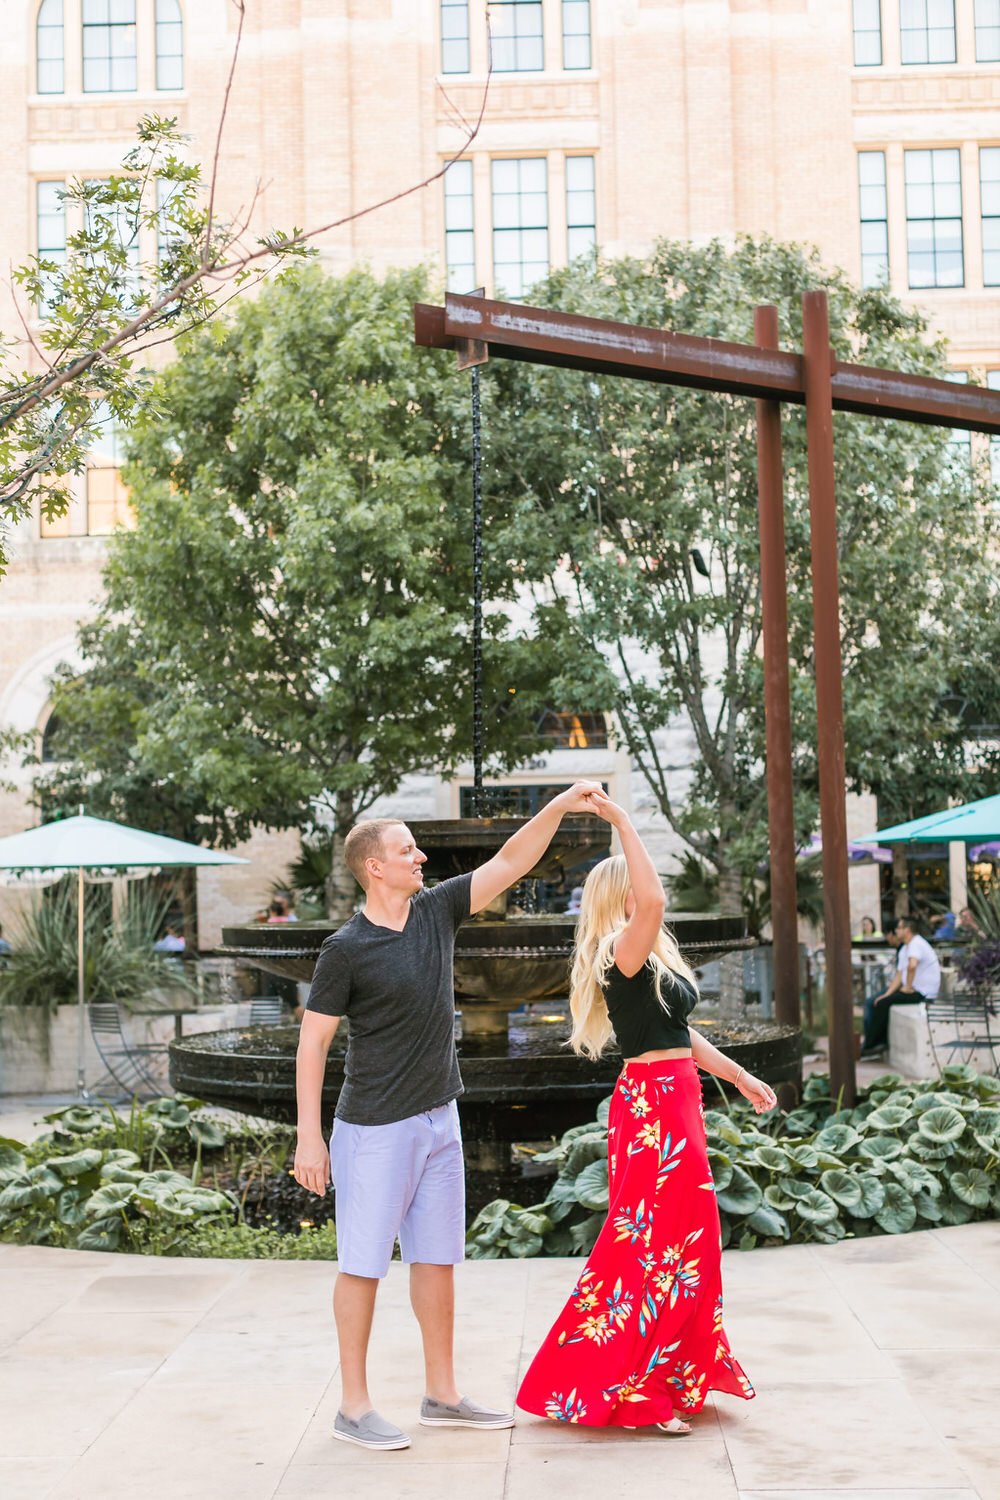 Summer Engagement Session at The Pearl in San Antonio, TX by Dawn Elizabeth Studios